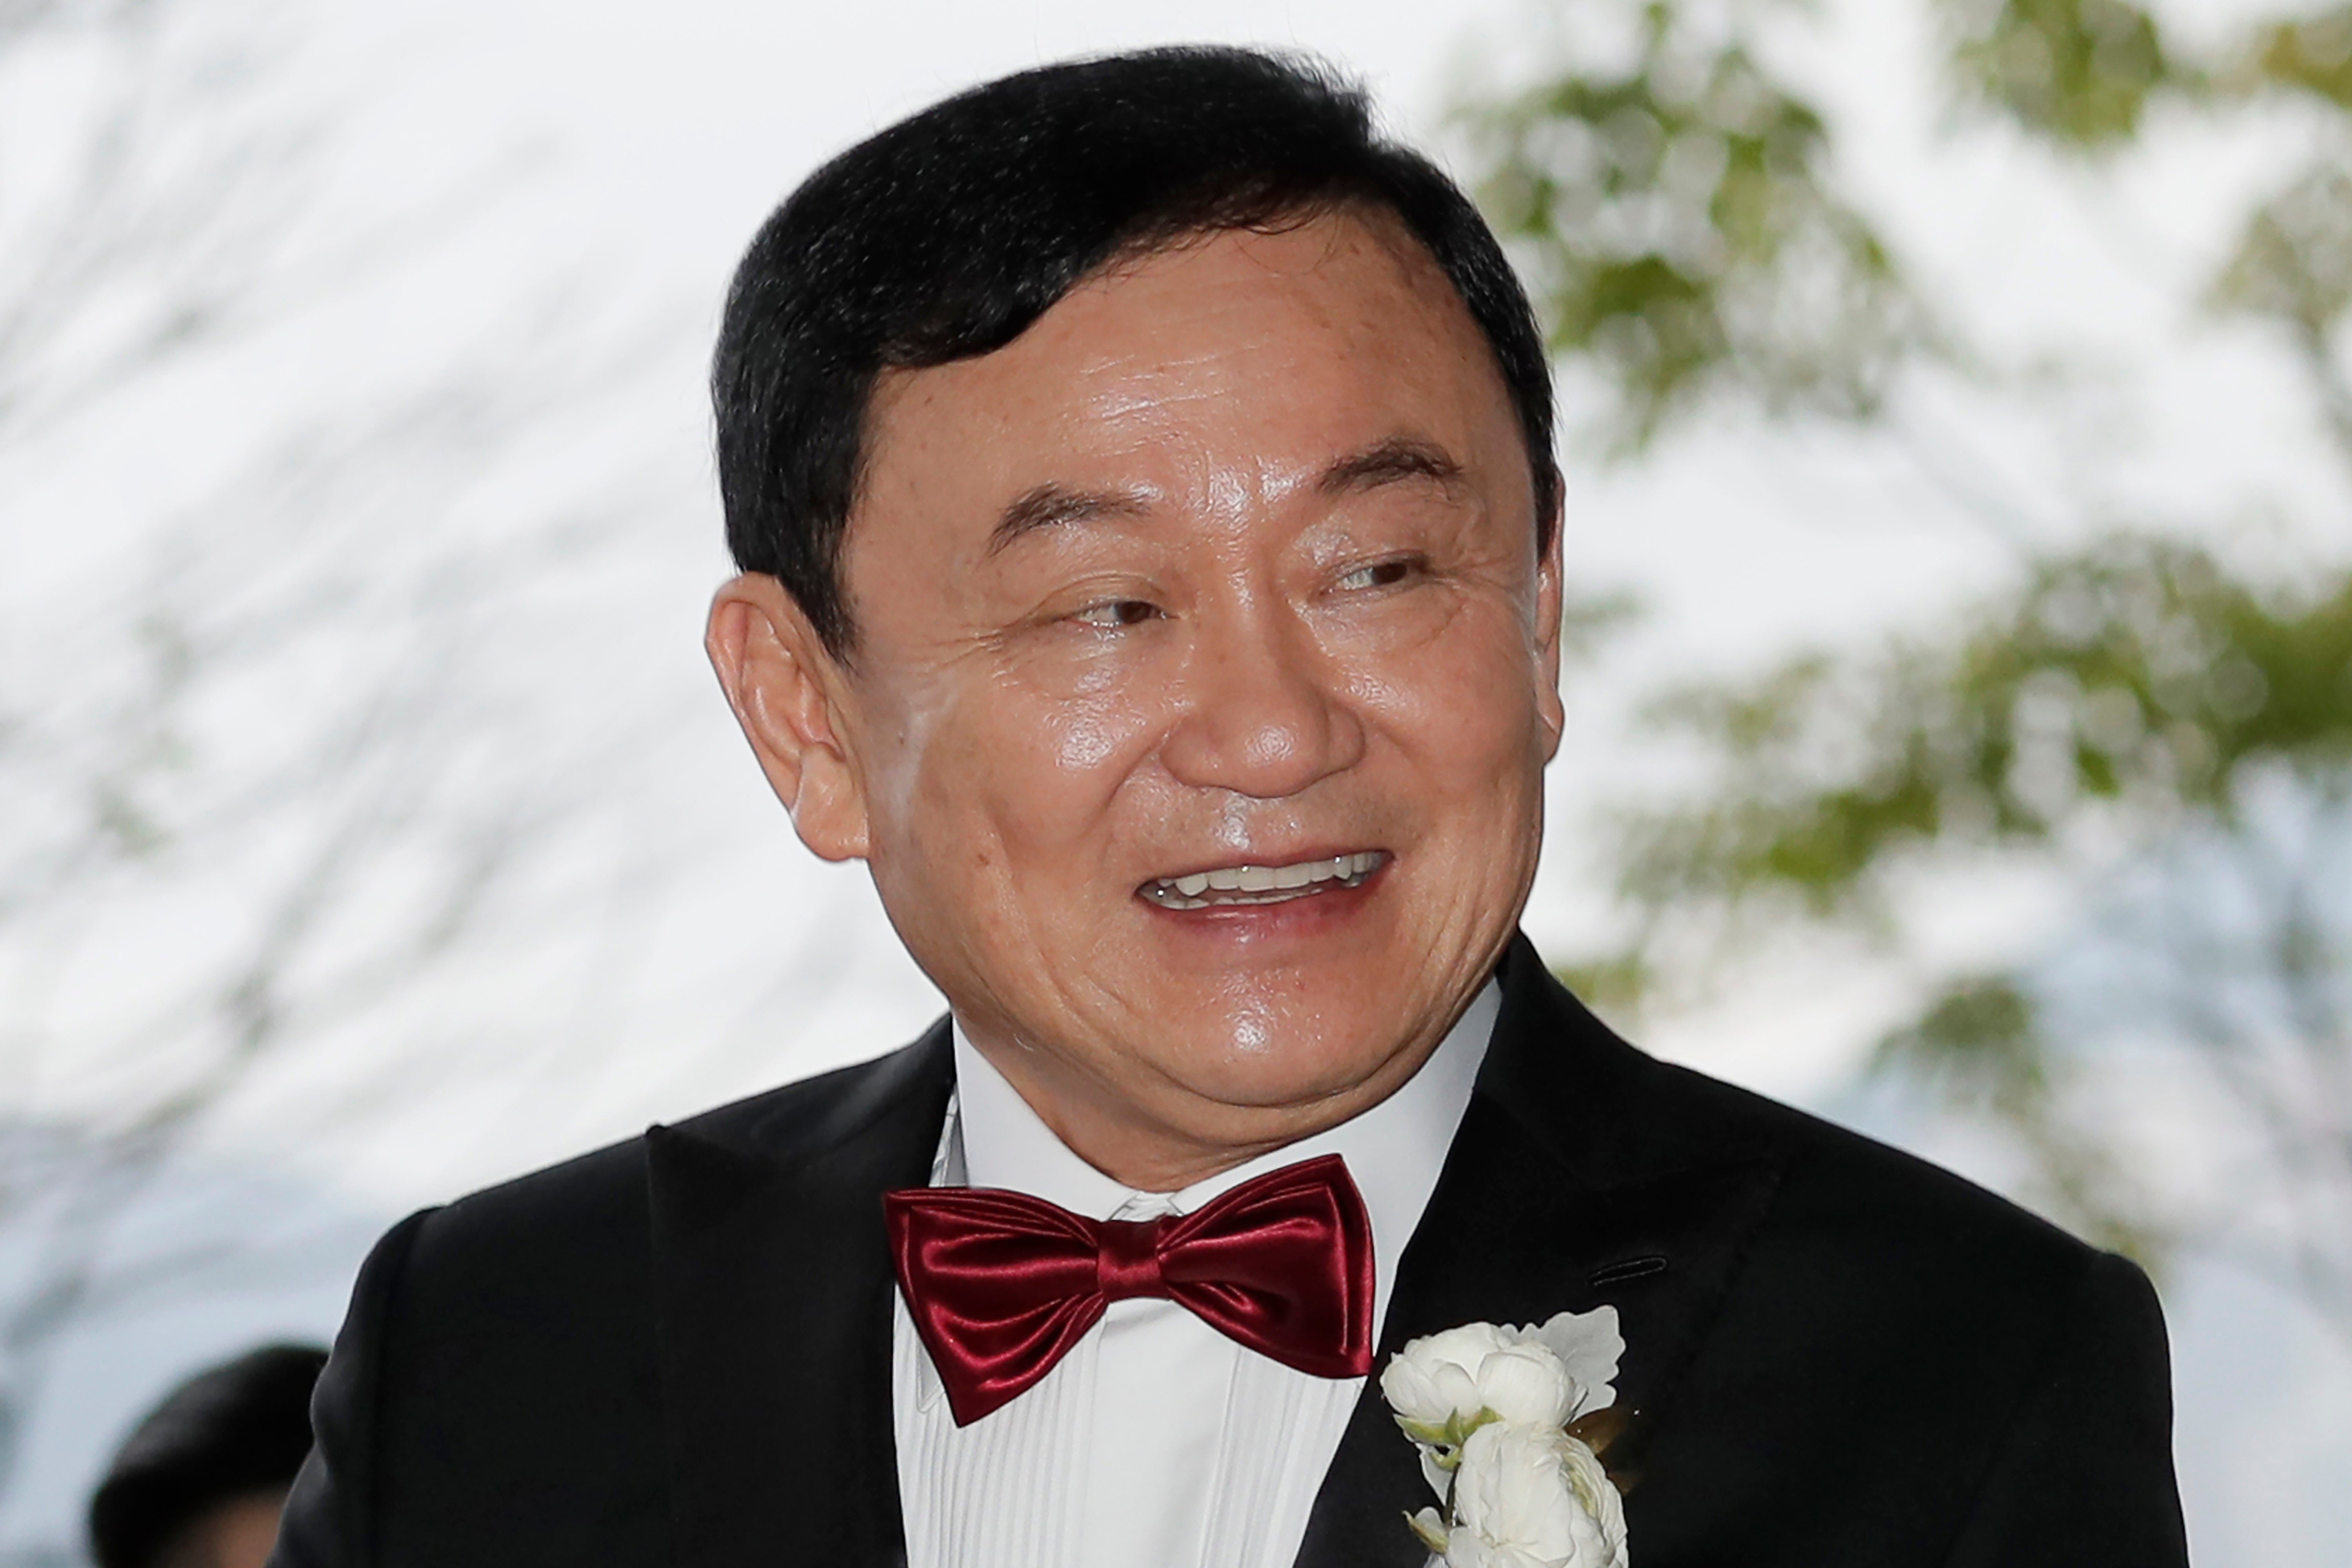 File. Former Thai PM Thaksin Shinawatra welcomes his guests for the wedding of his youngest daughter Paetongtarn ‘Ing’ Shinawatra at a hotel in Hong Kong on 22 March 2019